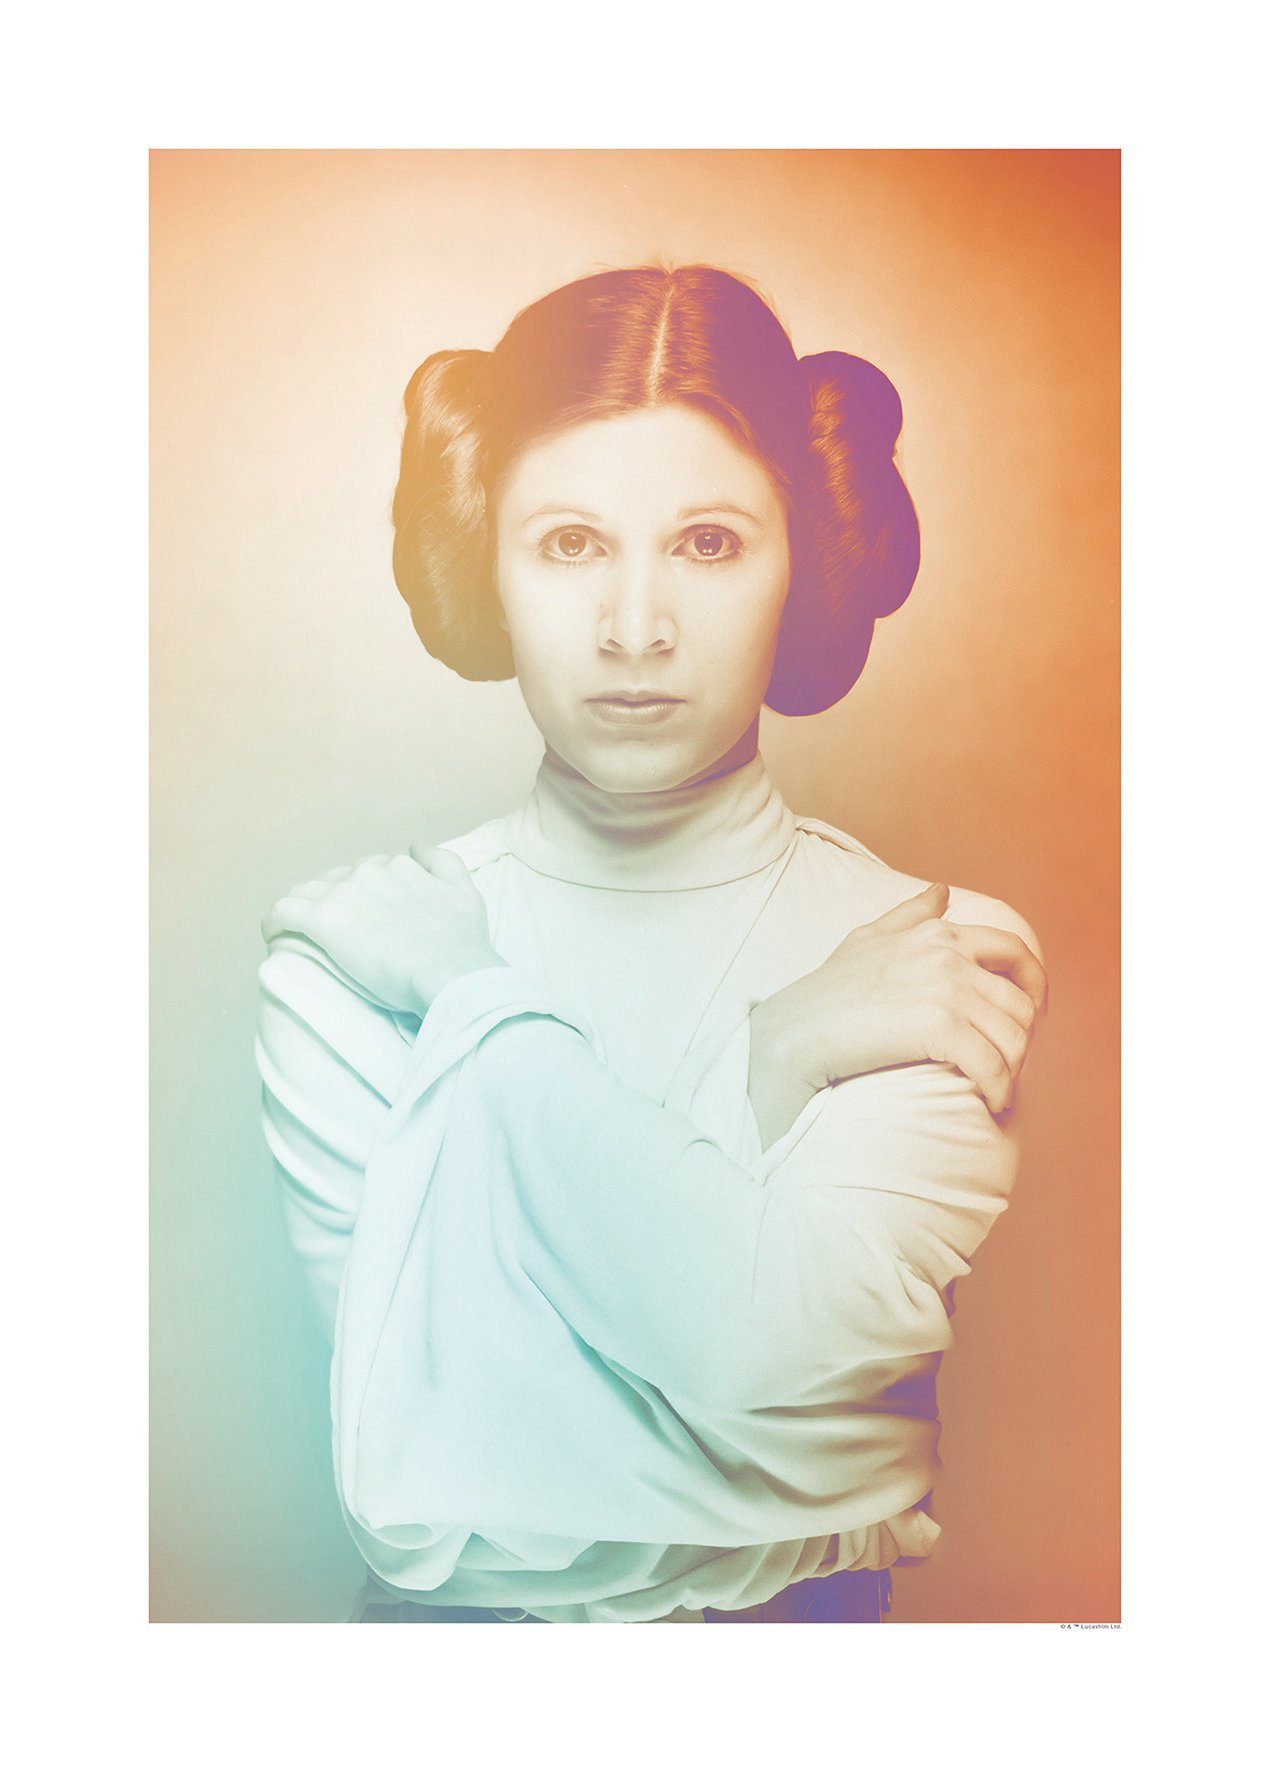 Komar Poster Star Wars Classic iconen Color Leia